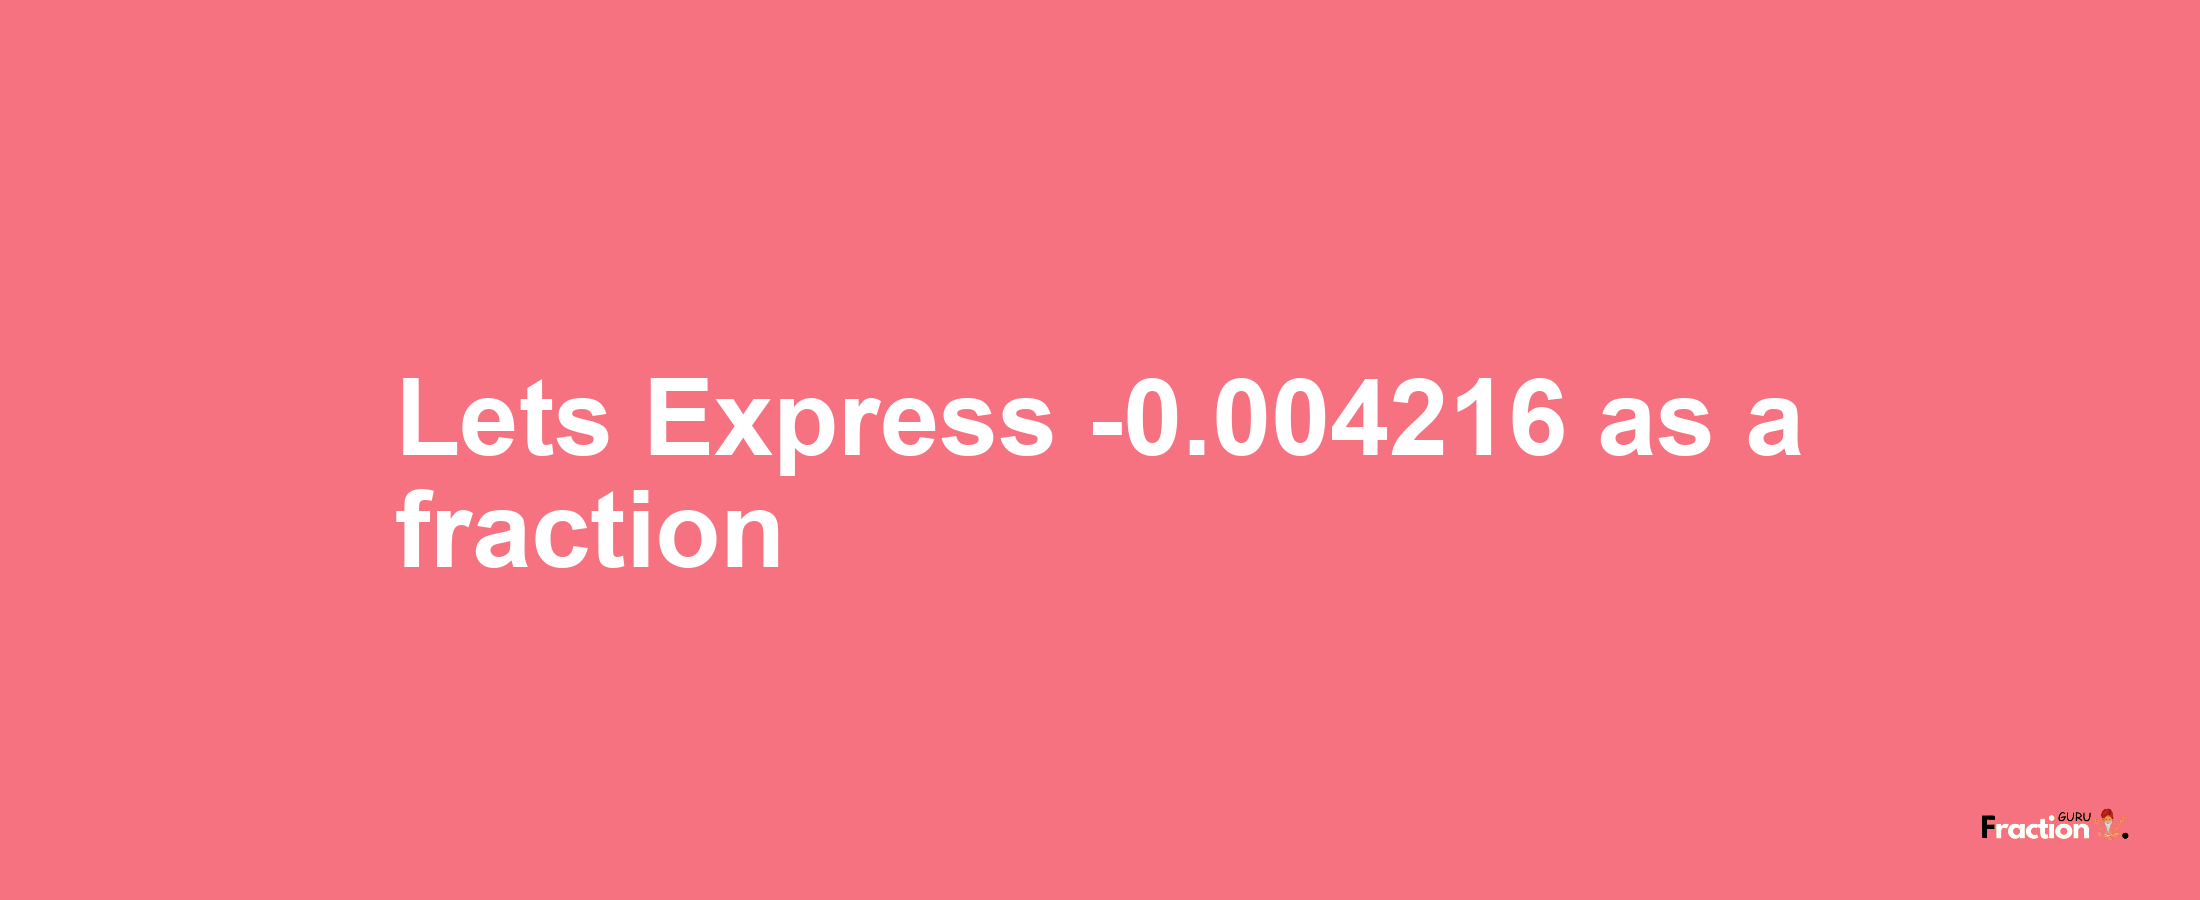 Lets Express -0.004216 as afraction